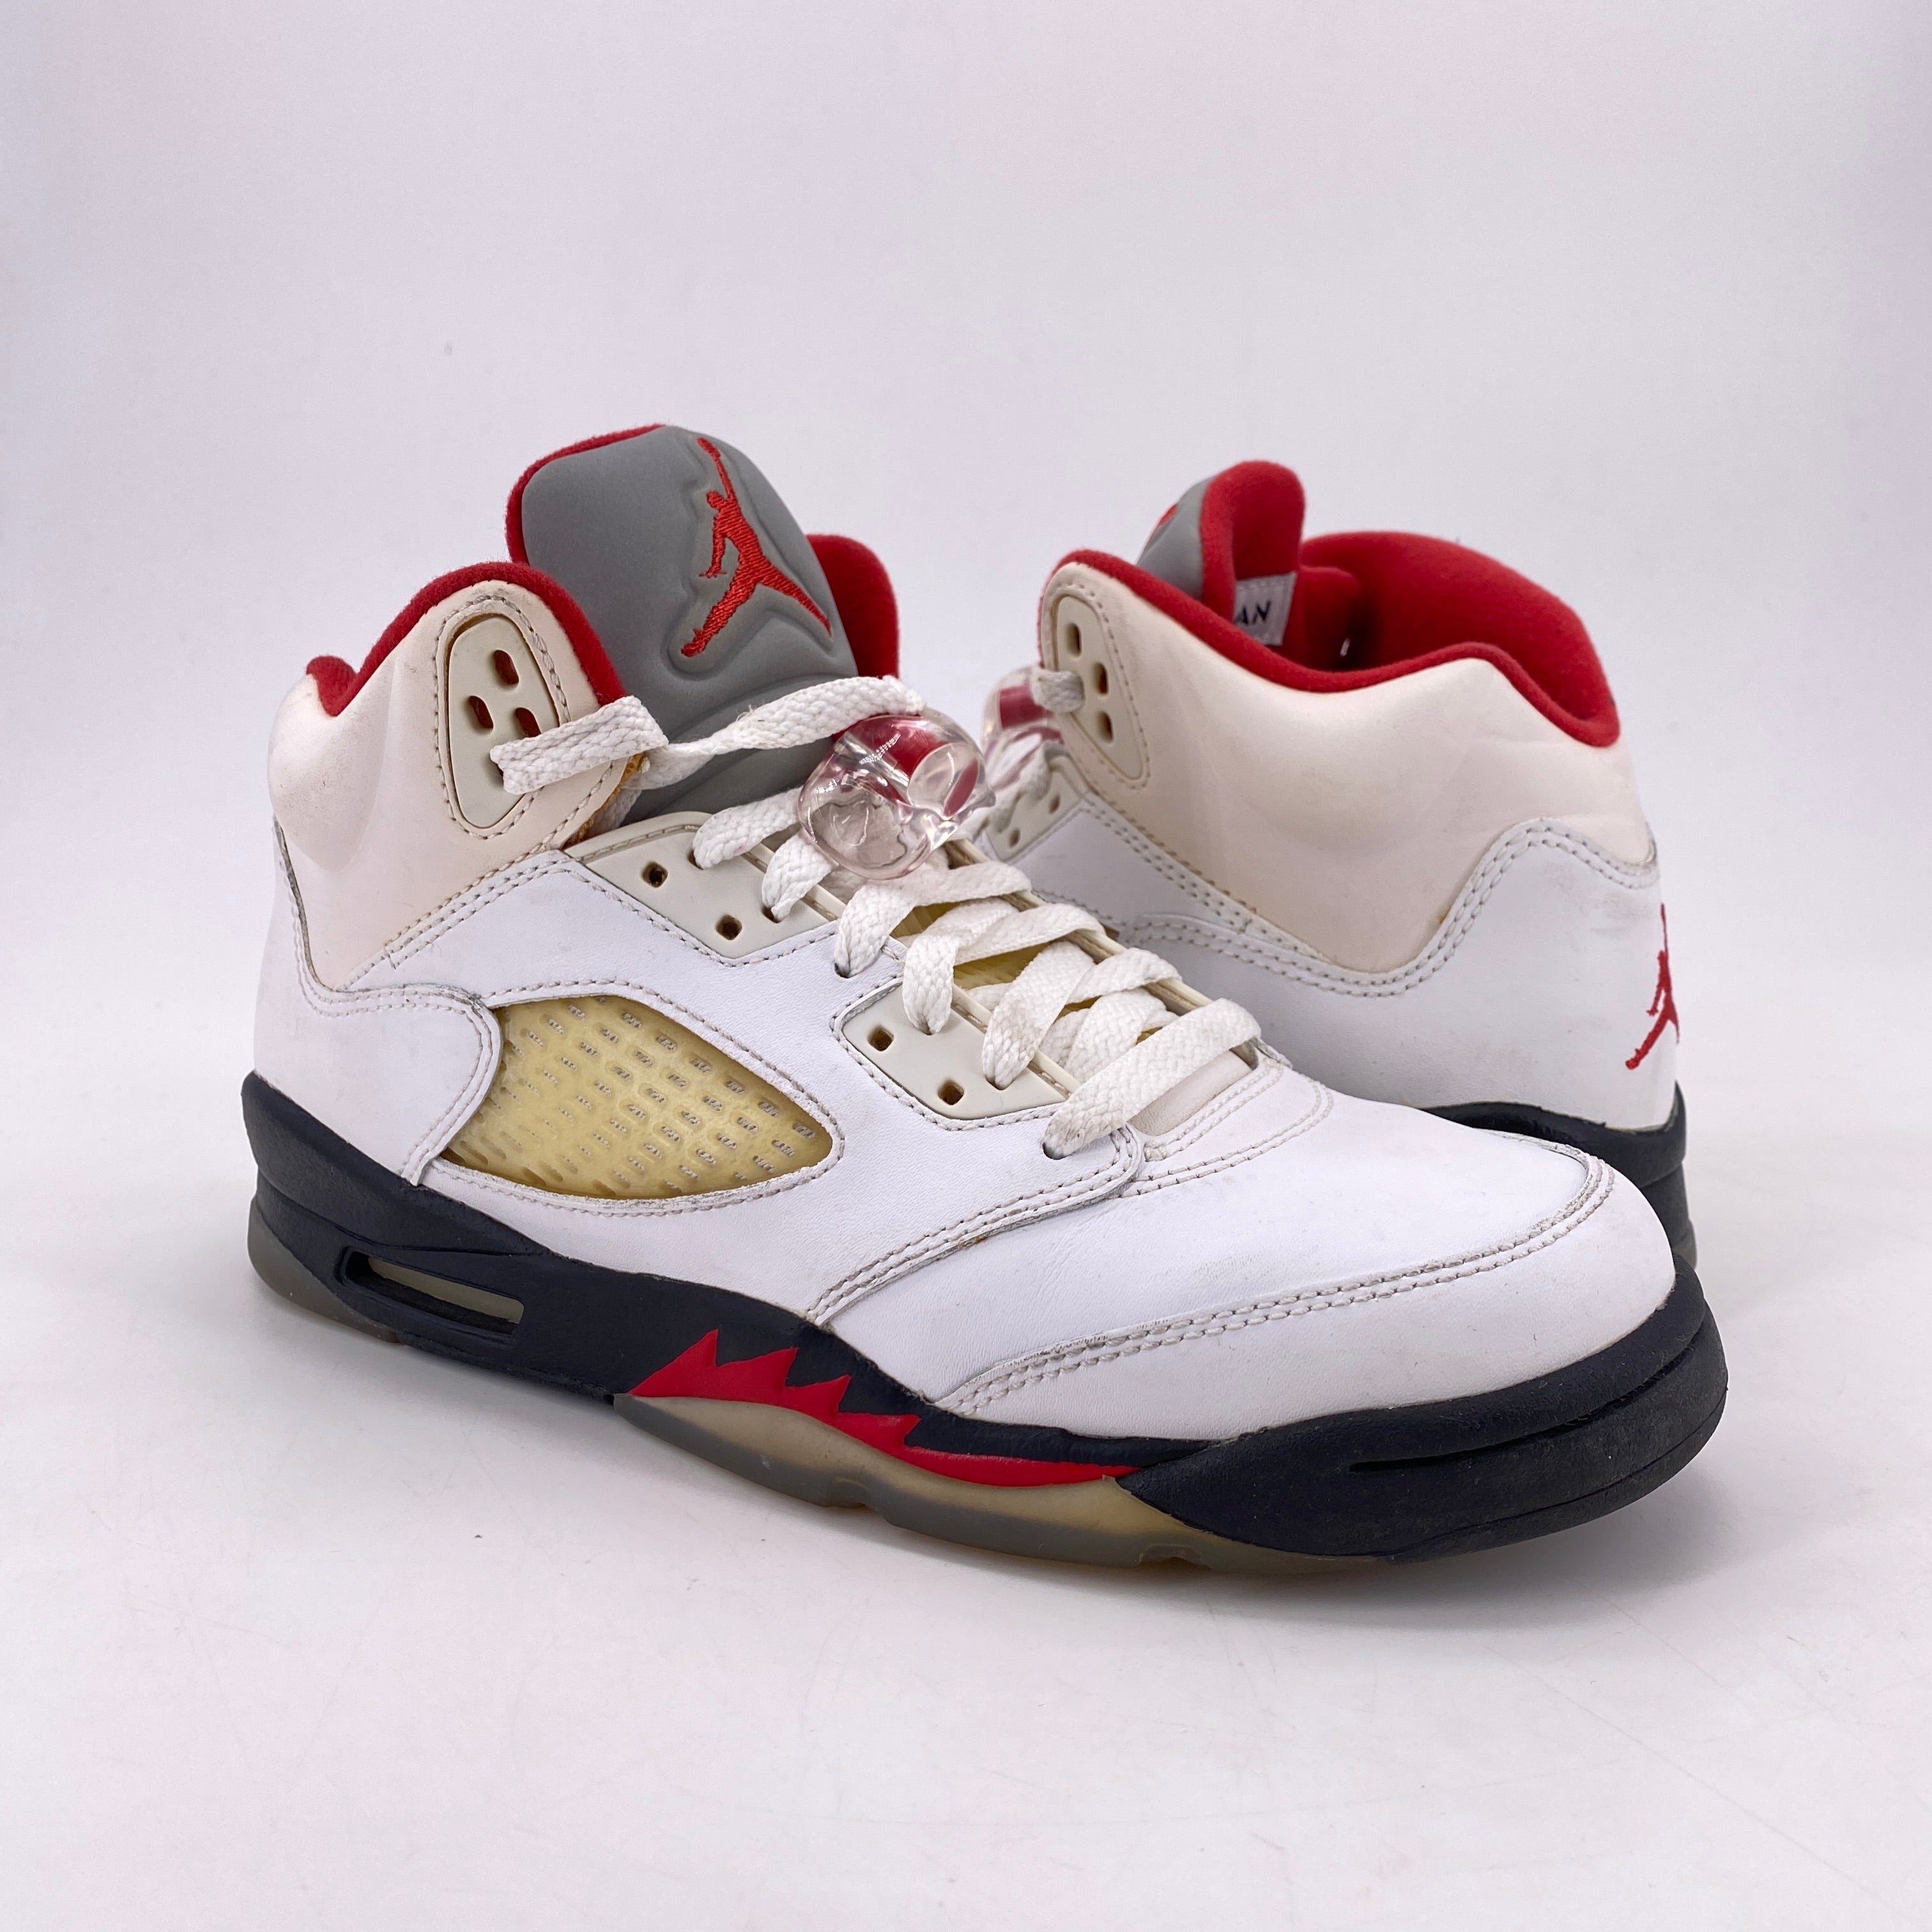 Air Jordan (GS) 5 Retro &quot;Fire Red&quot; 2013 Used Size 5.5Y